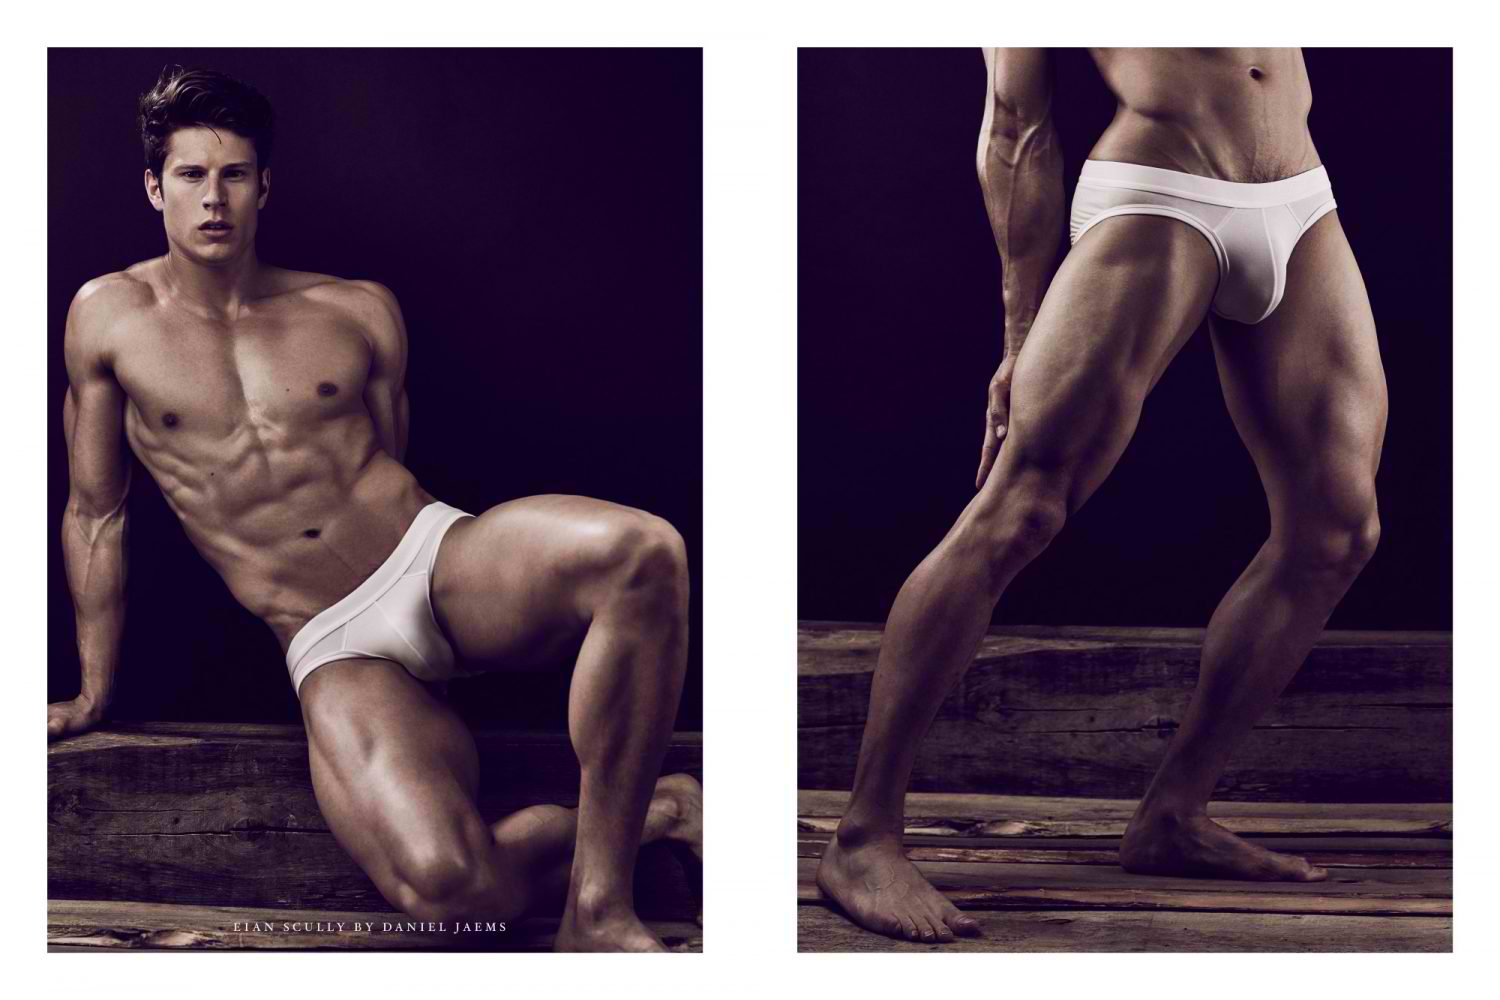 Eian-Scully-by-Daniel-Jaems-Obsession-No17-016-1500x1000 (1)